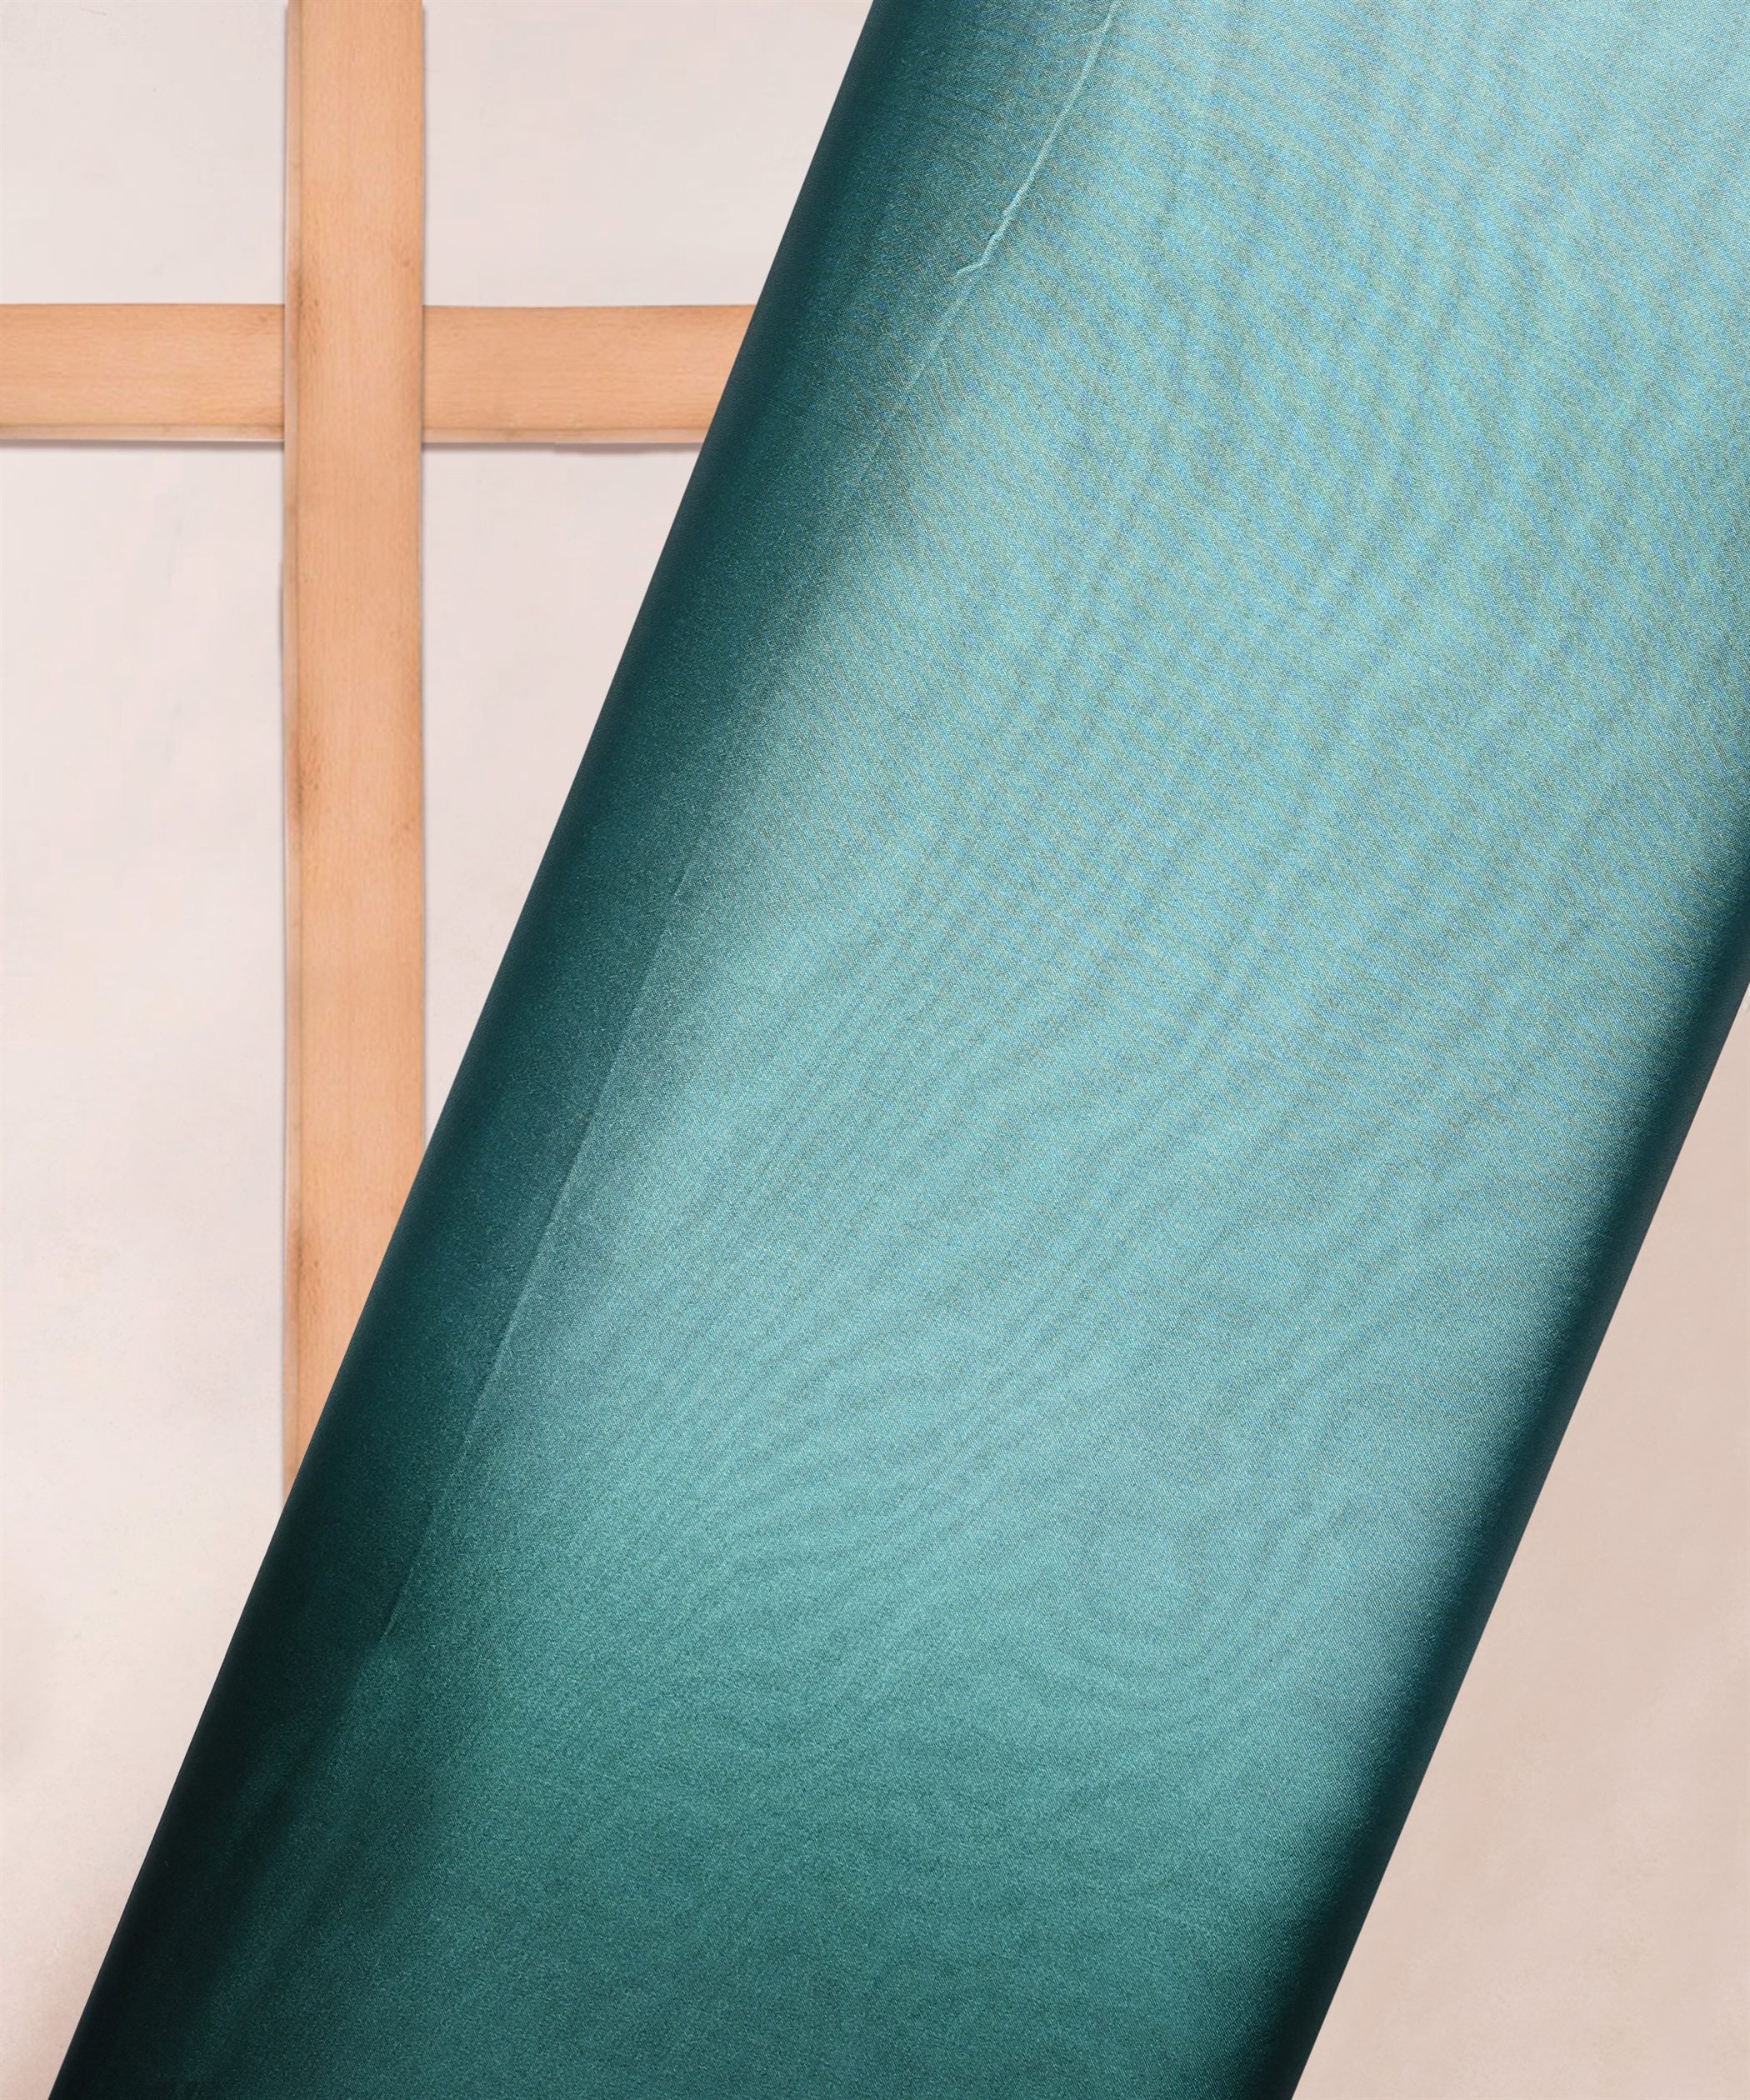 Dark Teal Plain Dyed Simmer Georgette Fabric